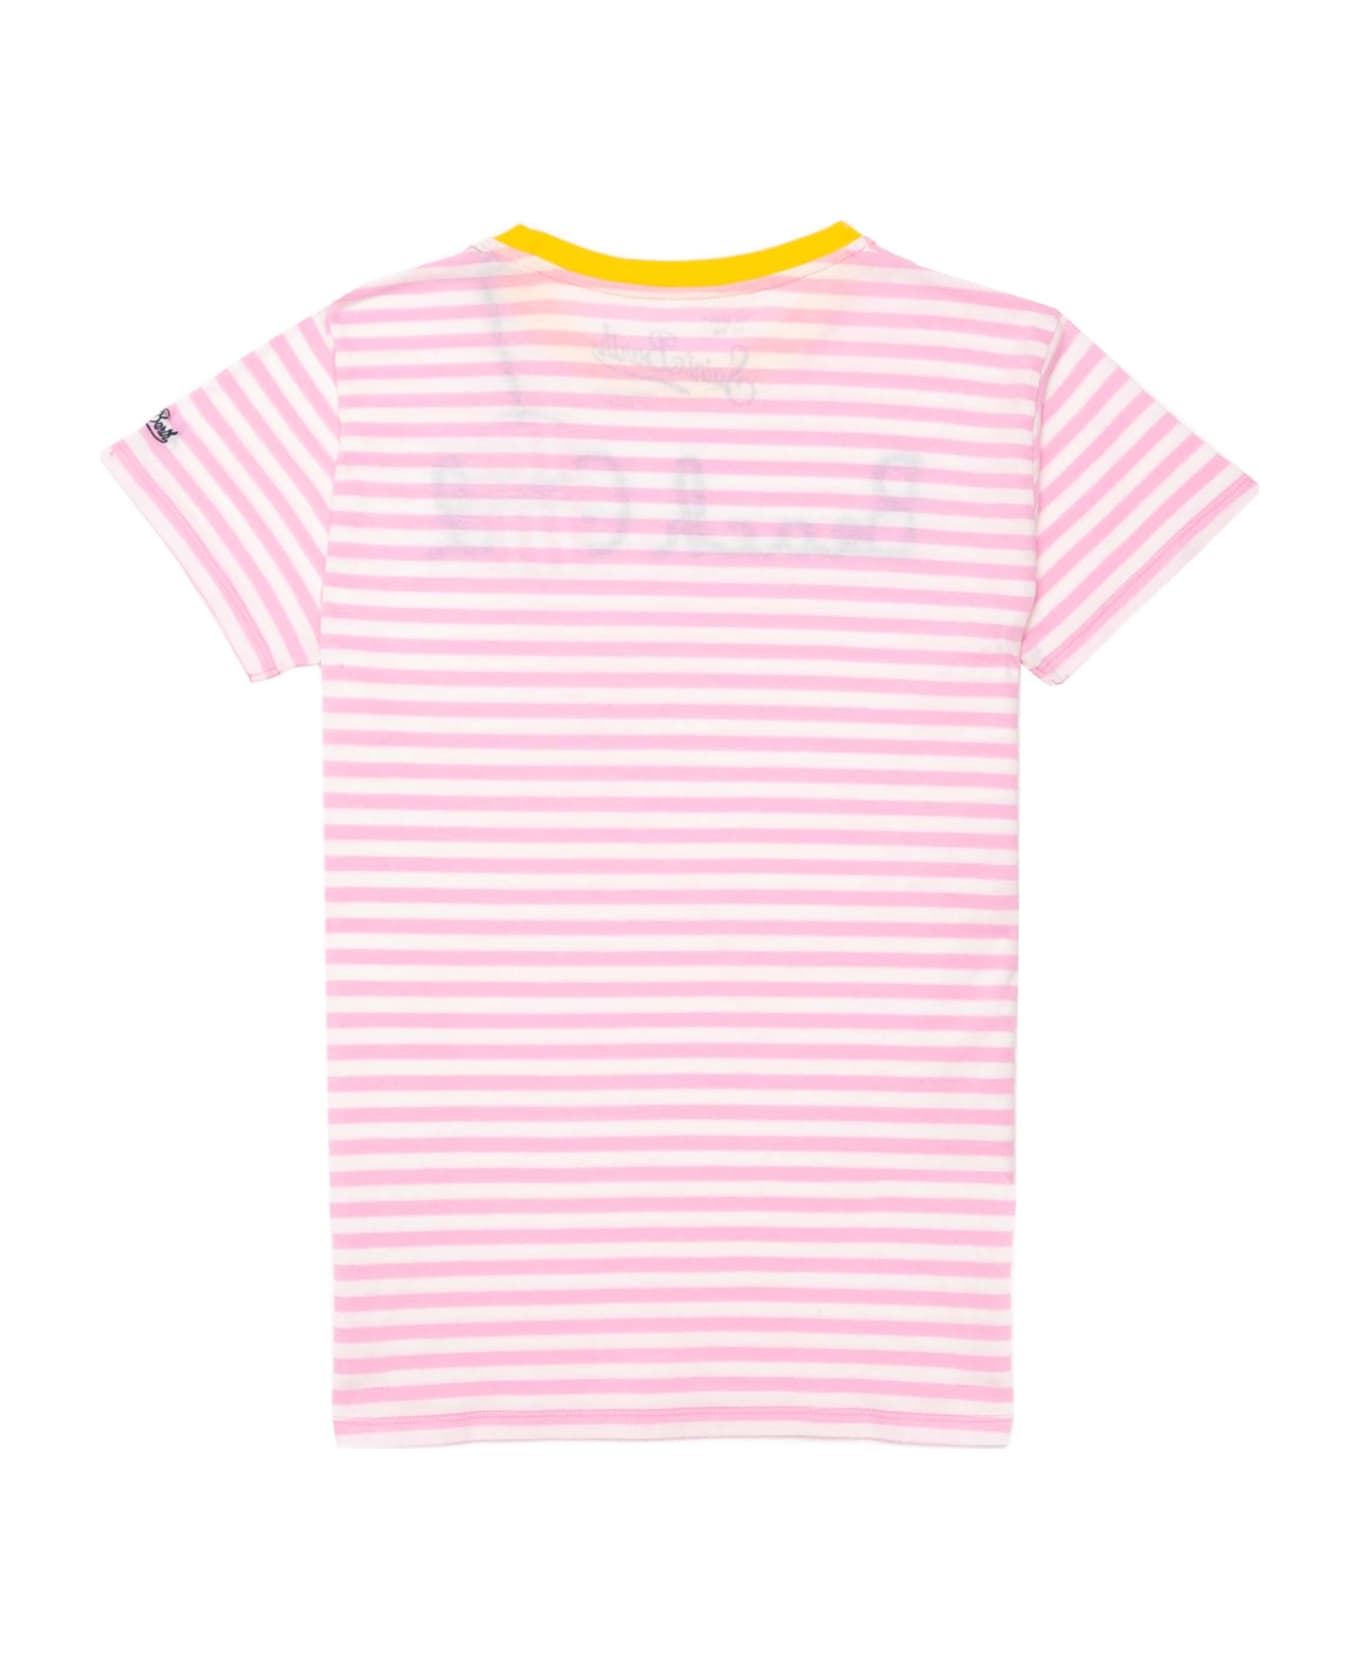 MC2 Saint Barth Pink Striped T-shirt With Embroidered Beach Girl - PINK